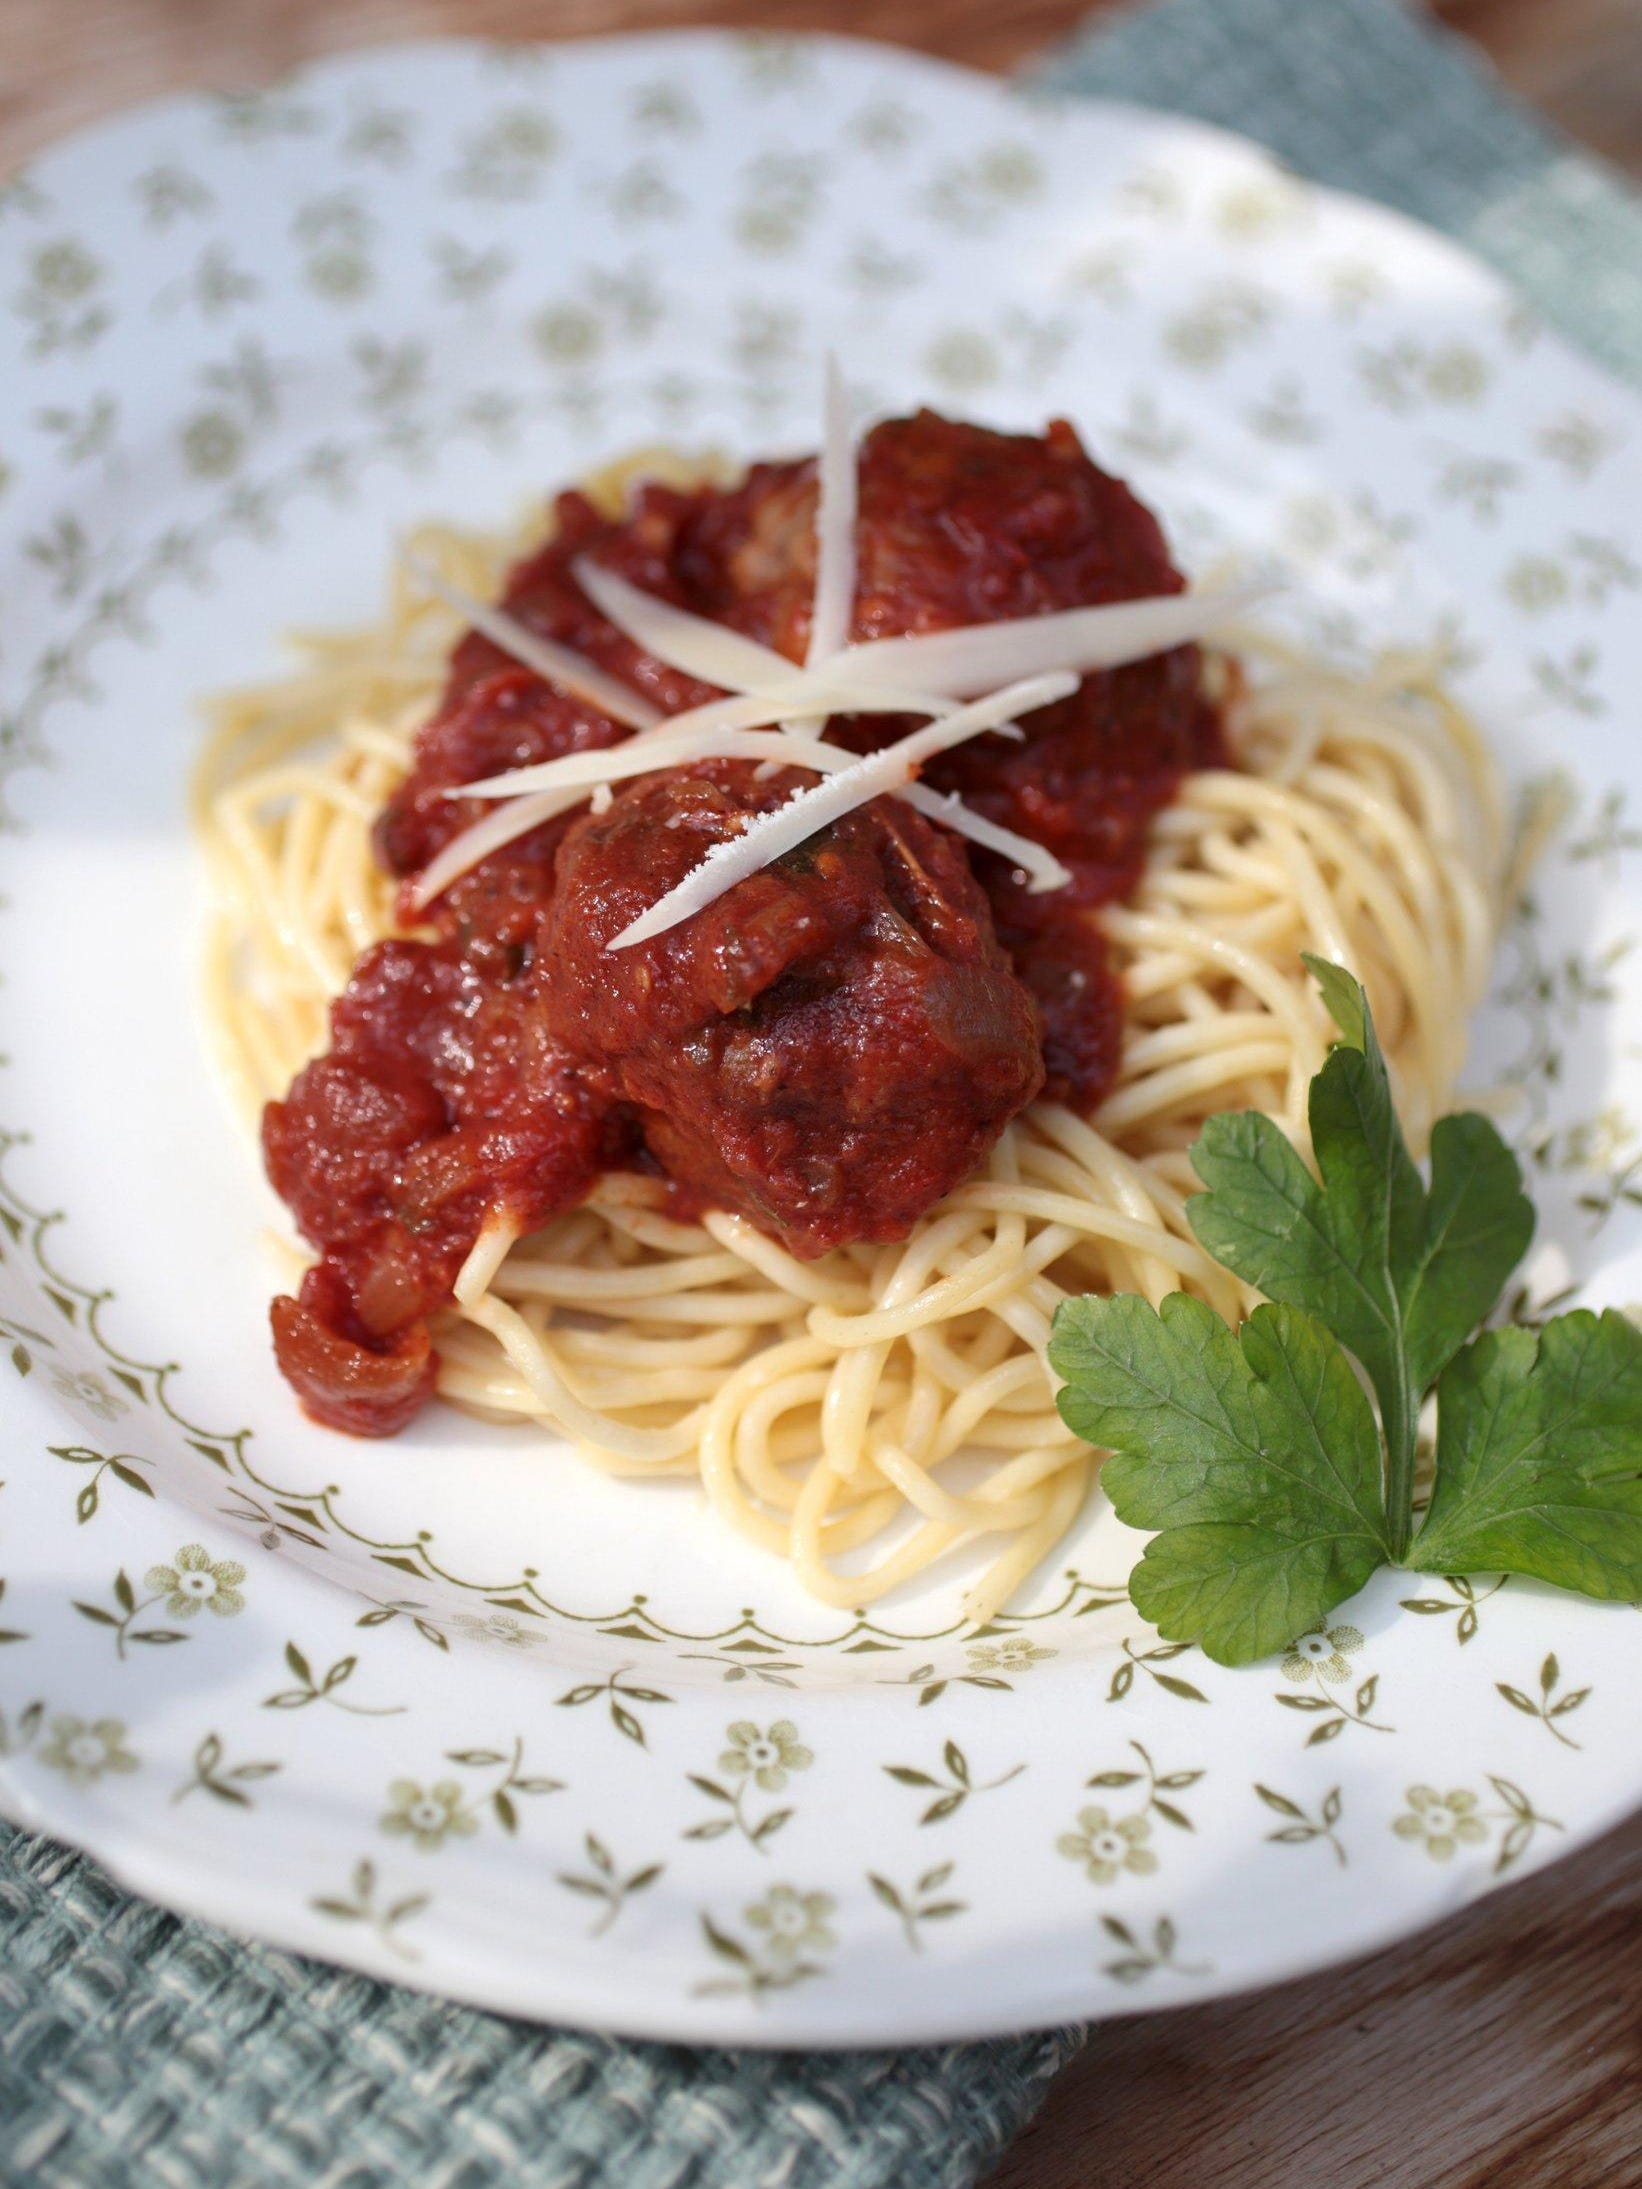 Real Meatballs and Spaghetti make a hearty dish for dinner.